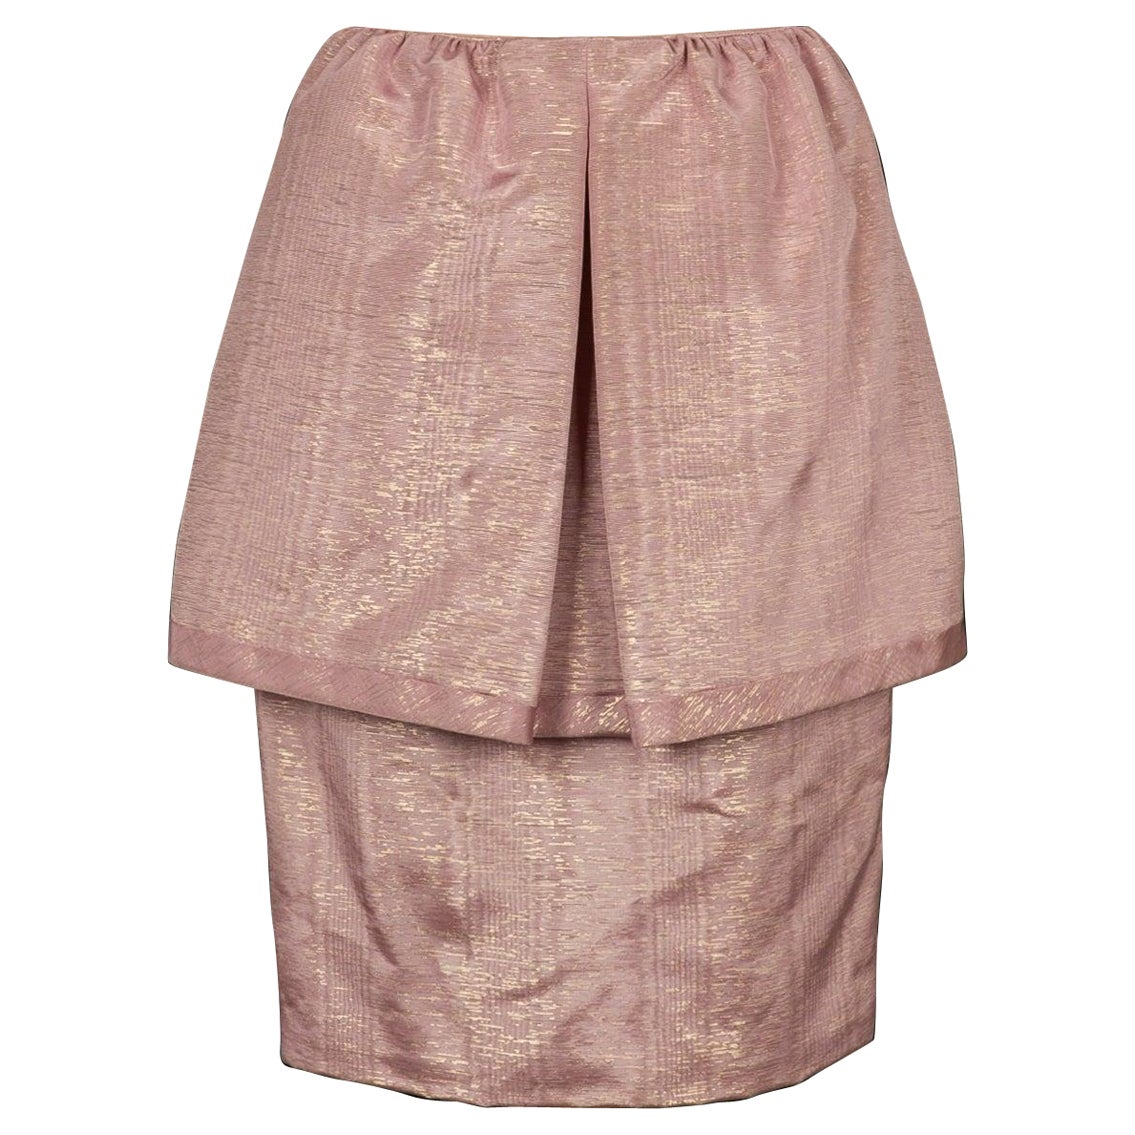 Nina Ricci Skirt in Pink Cotton Enhanced with Gold For Sale